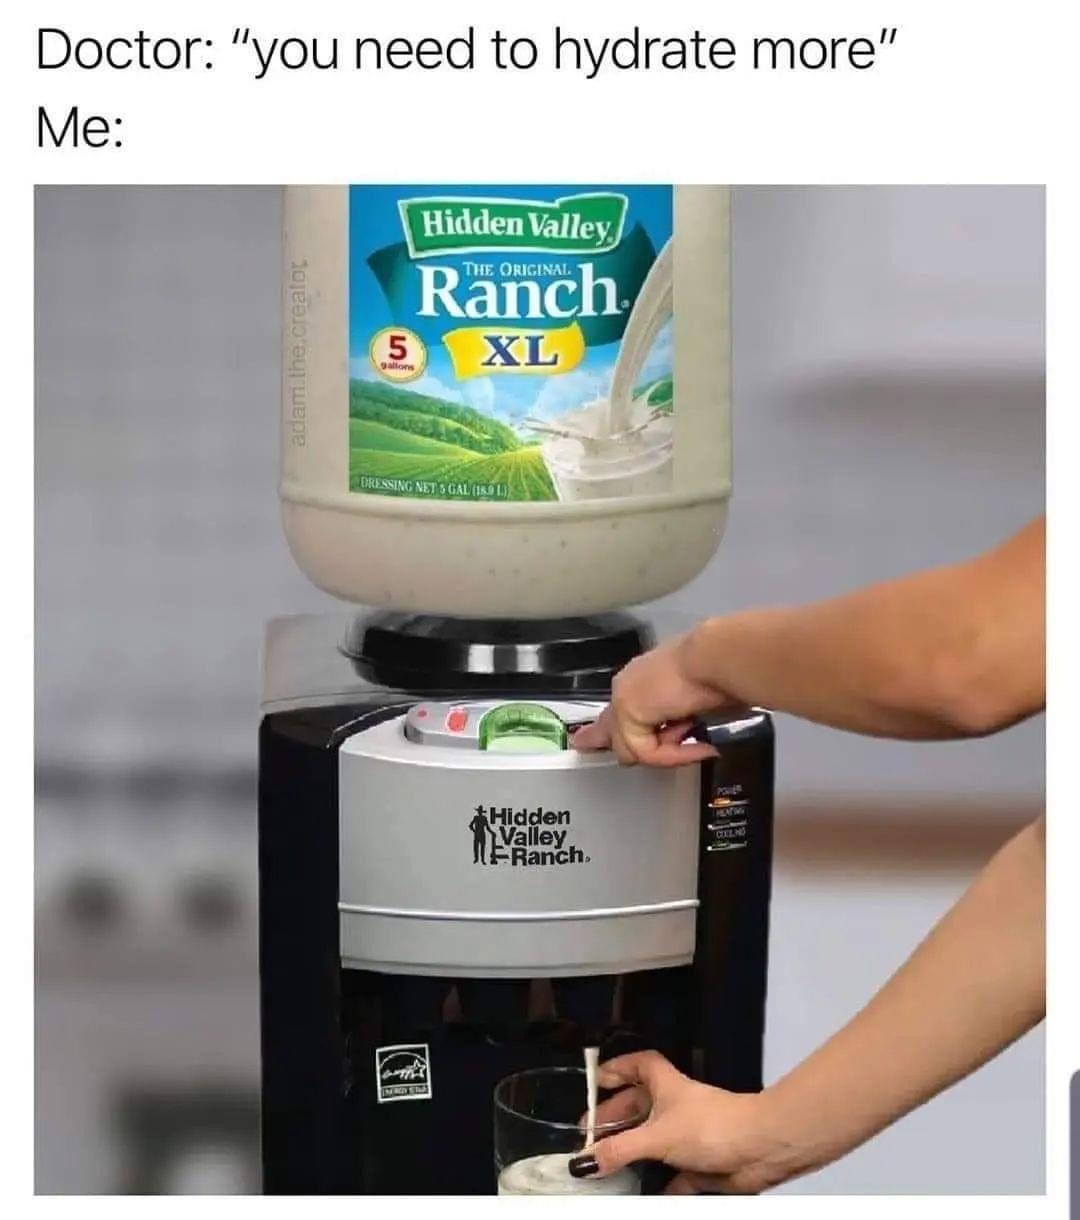 dank memes - coffeemaker - Doctor "you need to hydrate more" Me adam the creator Hidden Valley The Original Ranch Xl 5 gallons Dressing Net 5 Gal 1891 Mergy Srp Hidden Valley FRanch, Moting